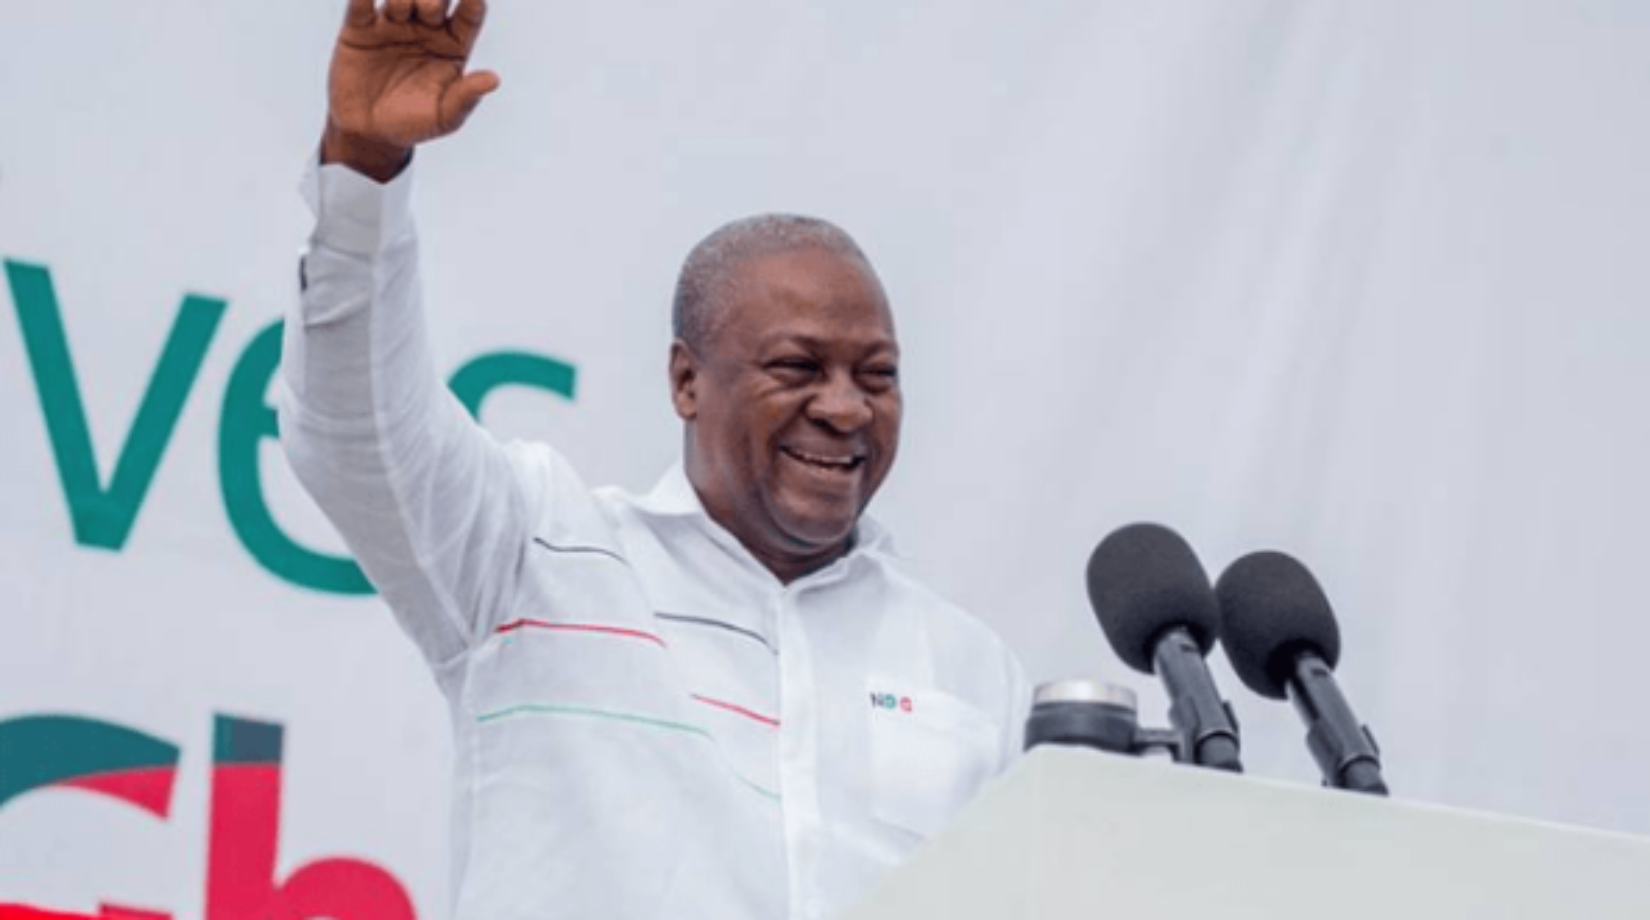 Mahama chairs launch of new book on leadership by Obasanjo.